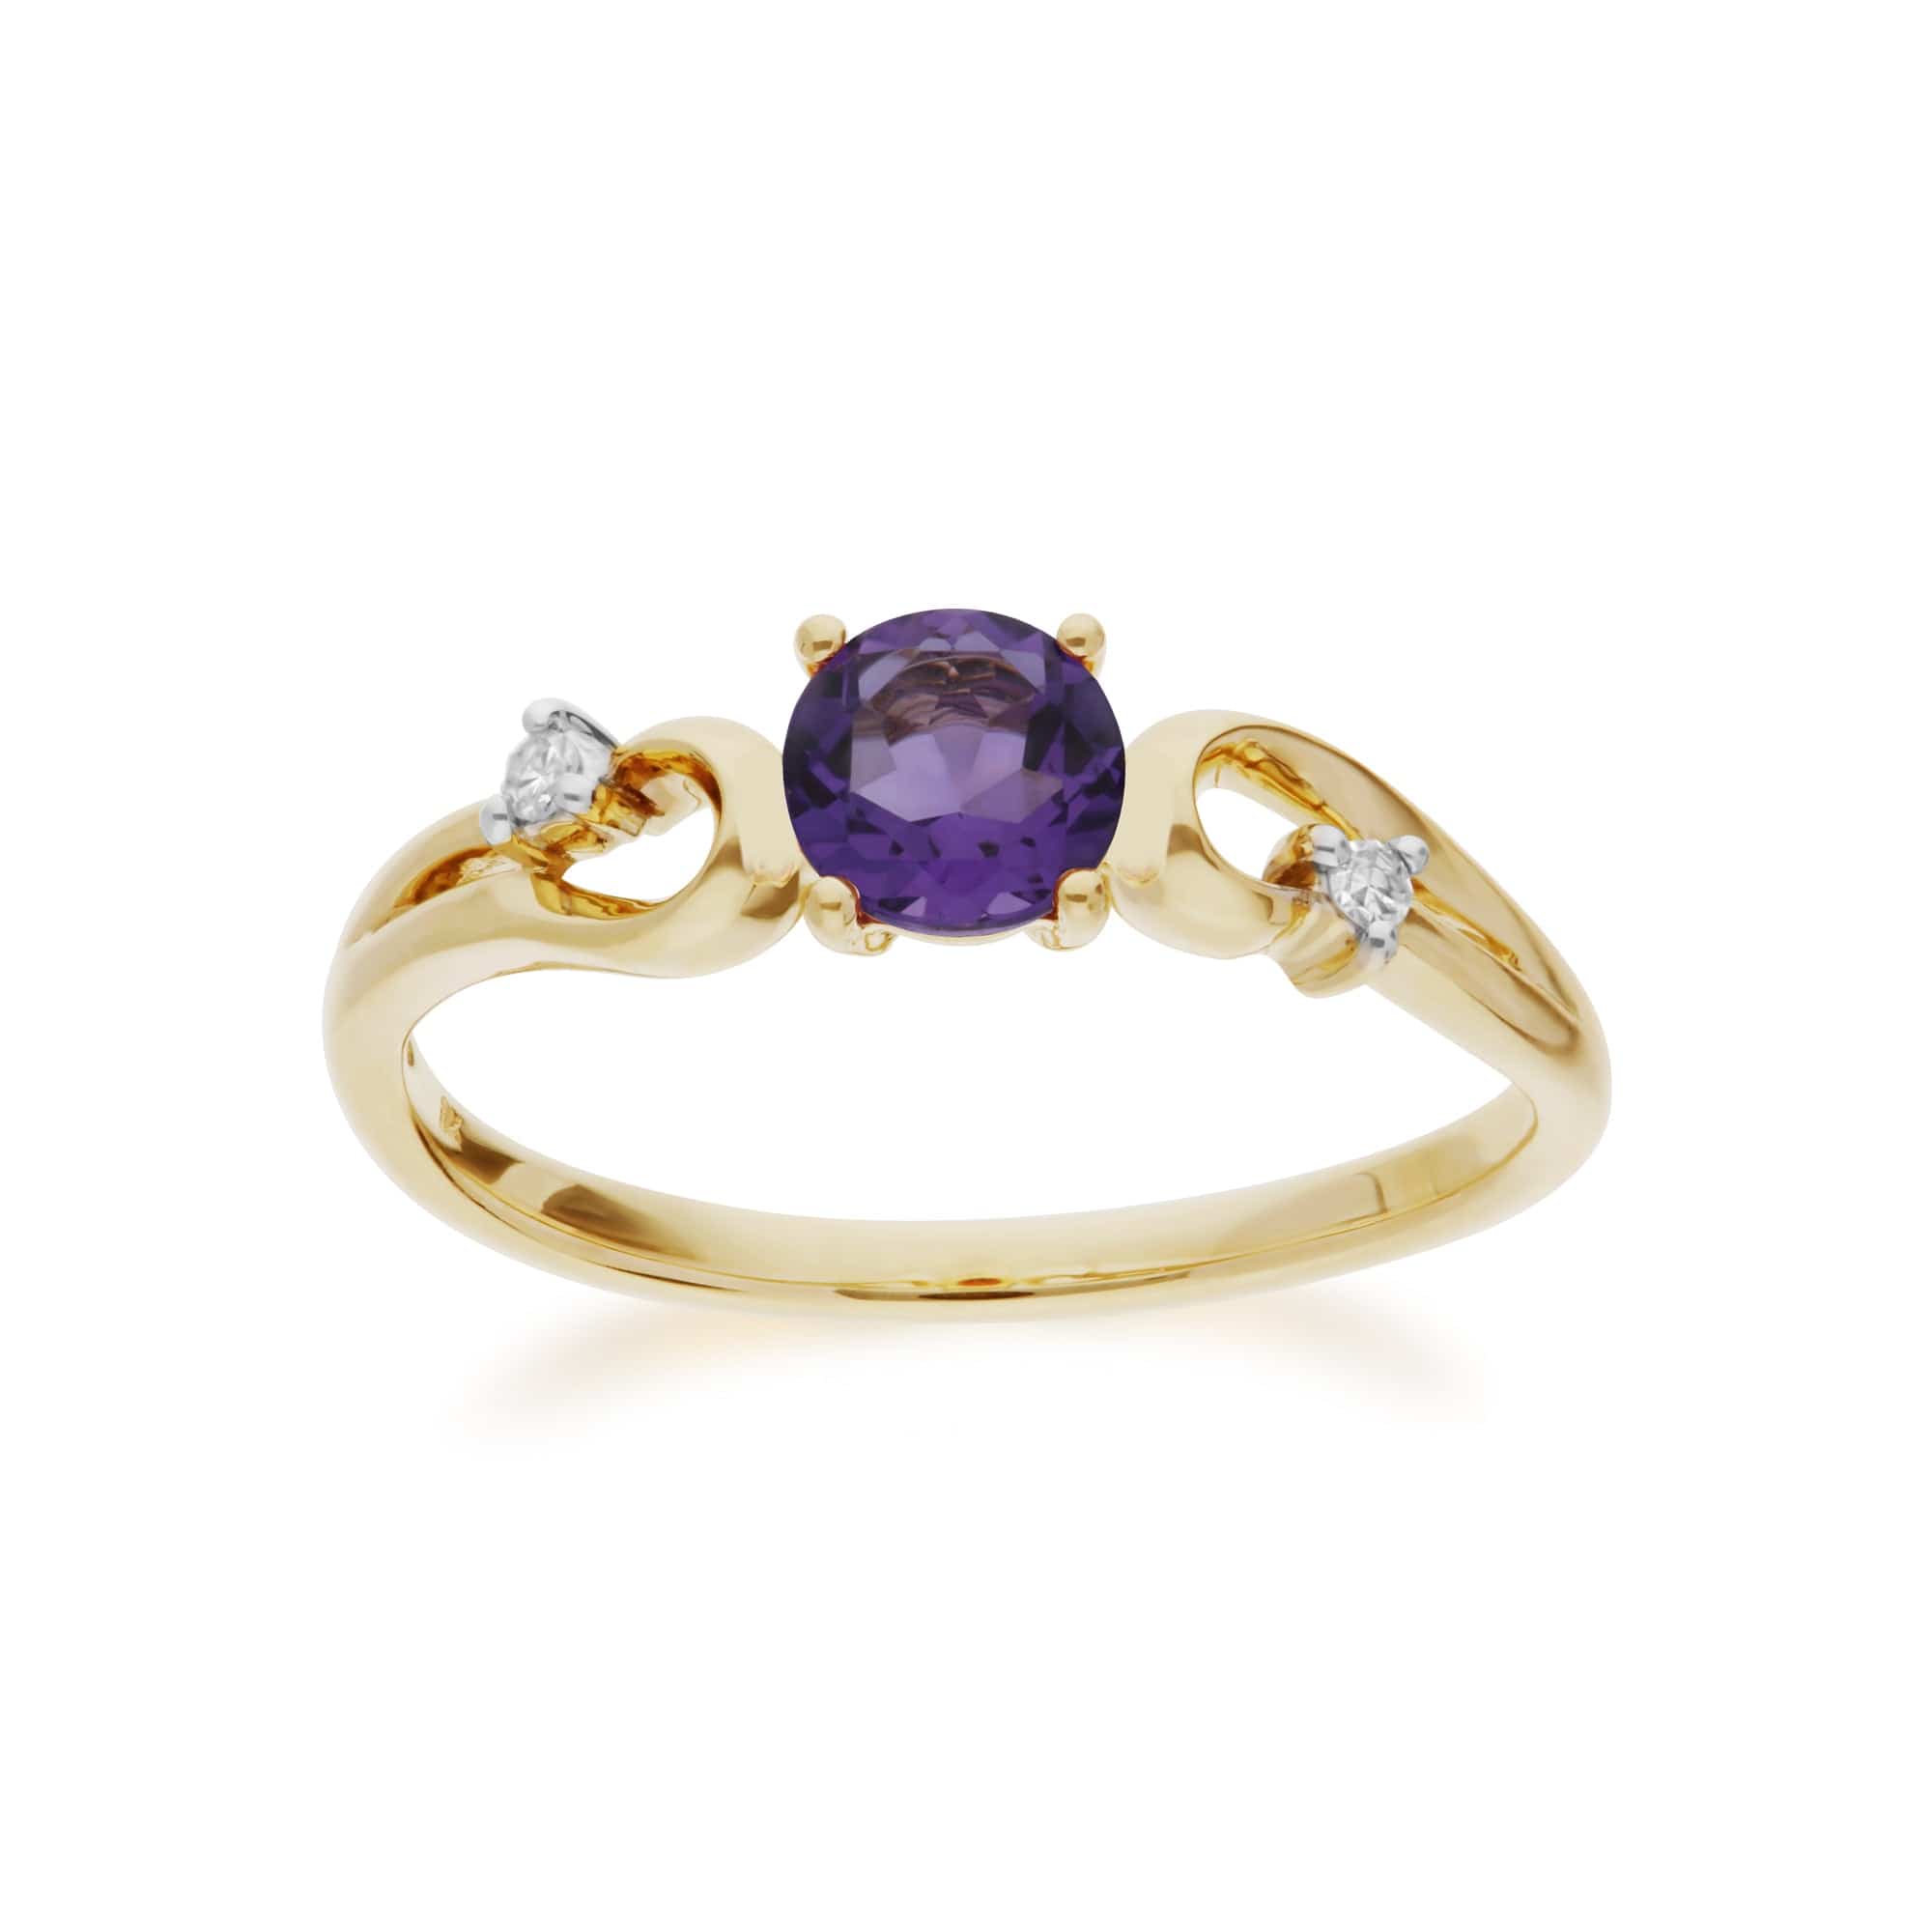 135R1742019 Classic Round Amethyst & Diamond Ring in 9ct Yellow Gold 1